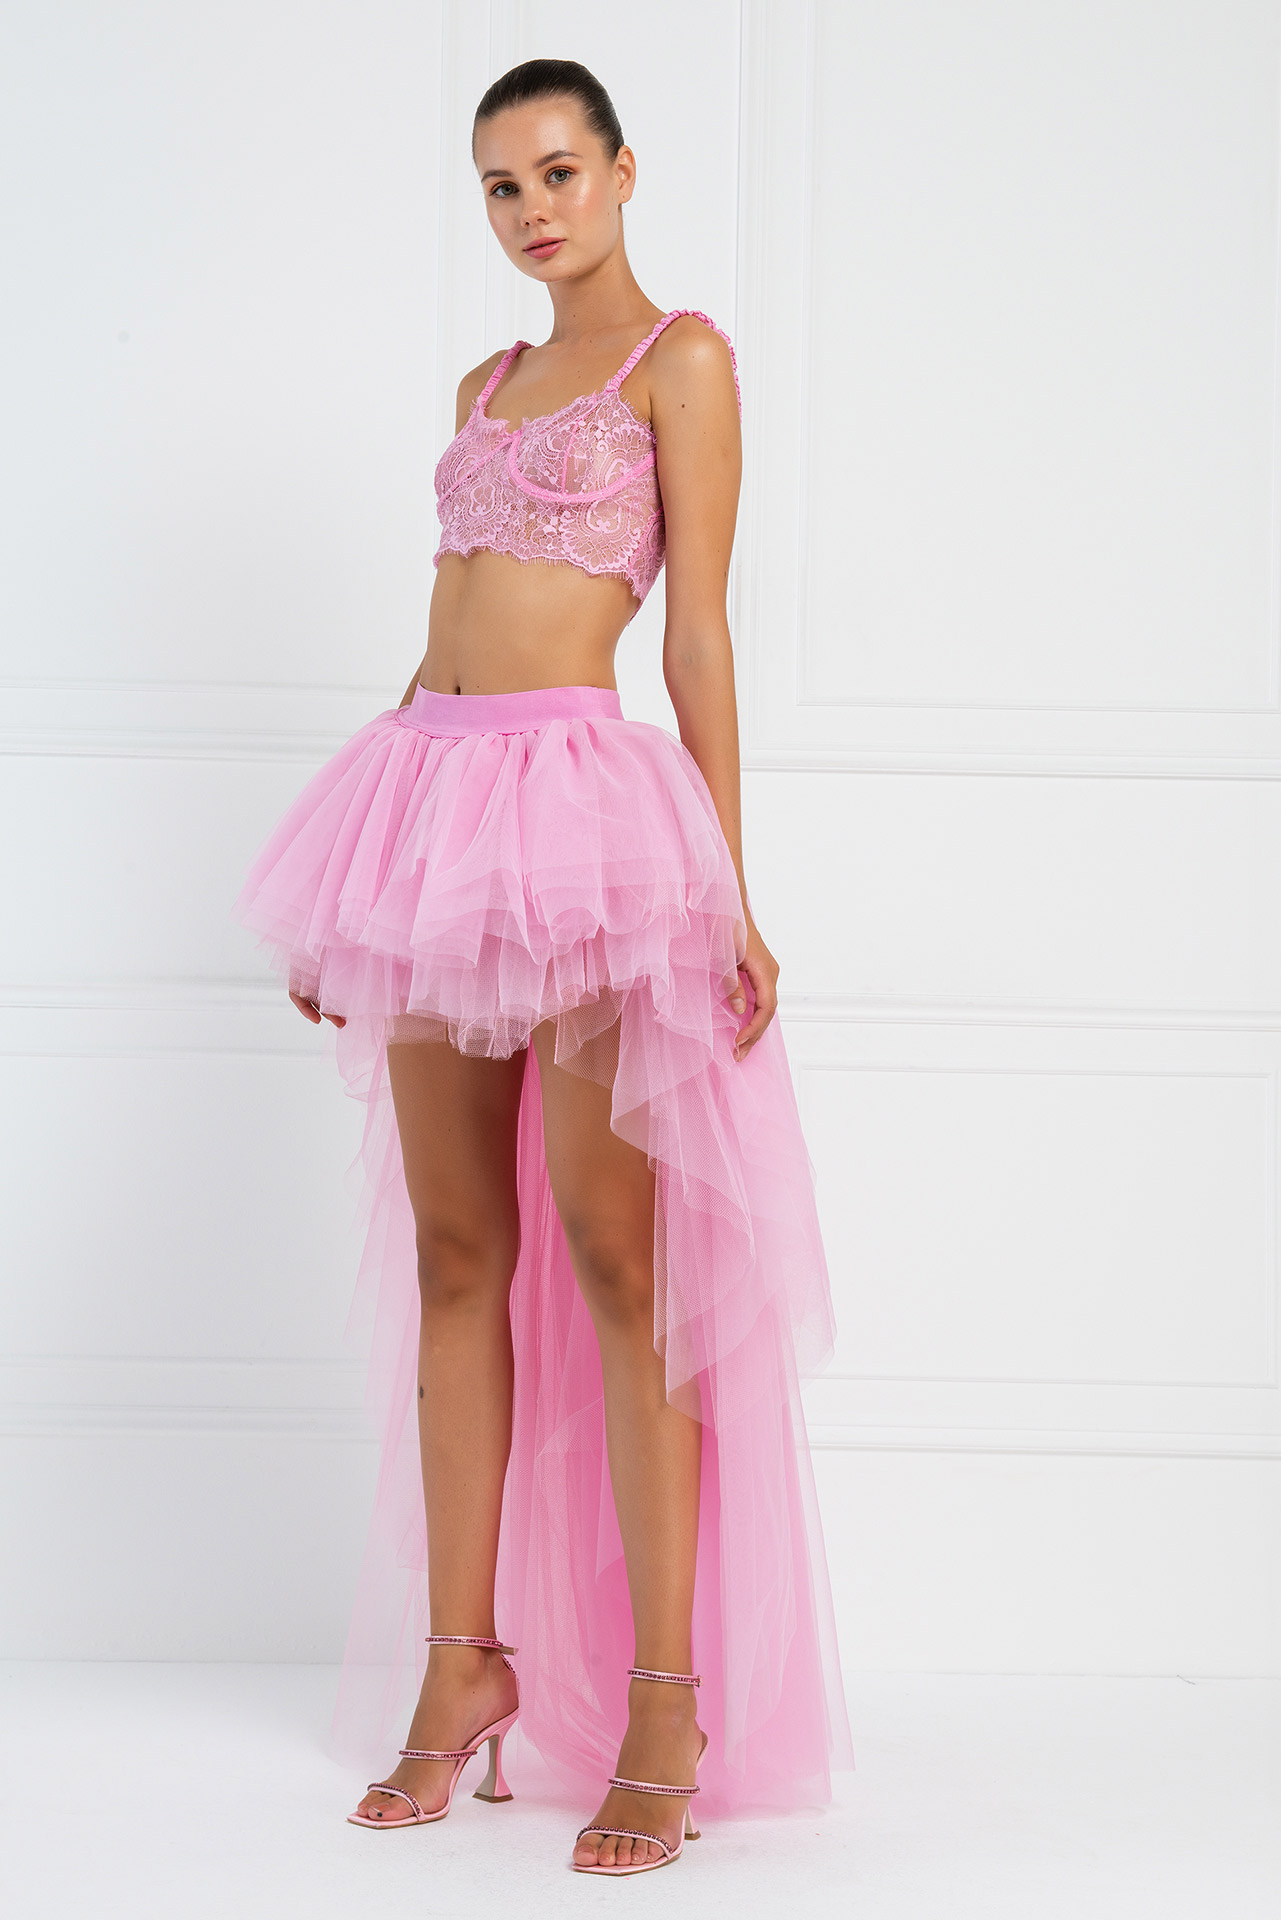 High Low New Pink Tulle Skirt